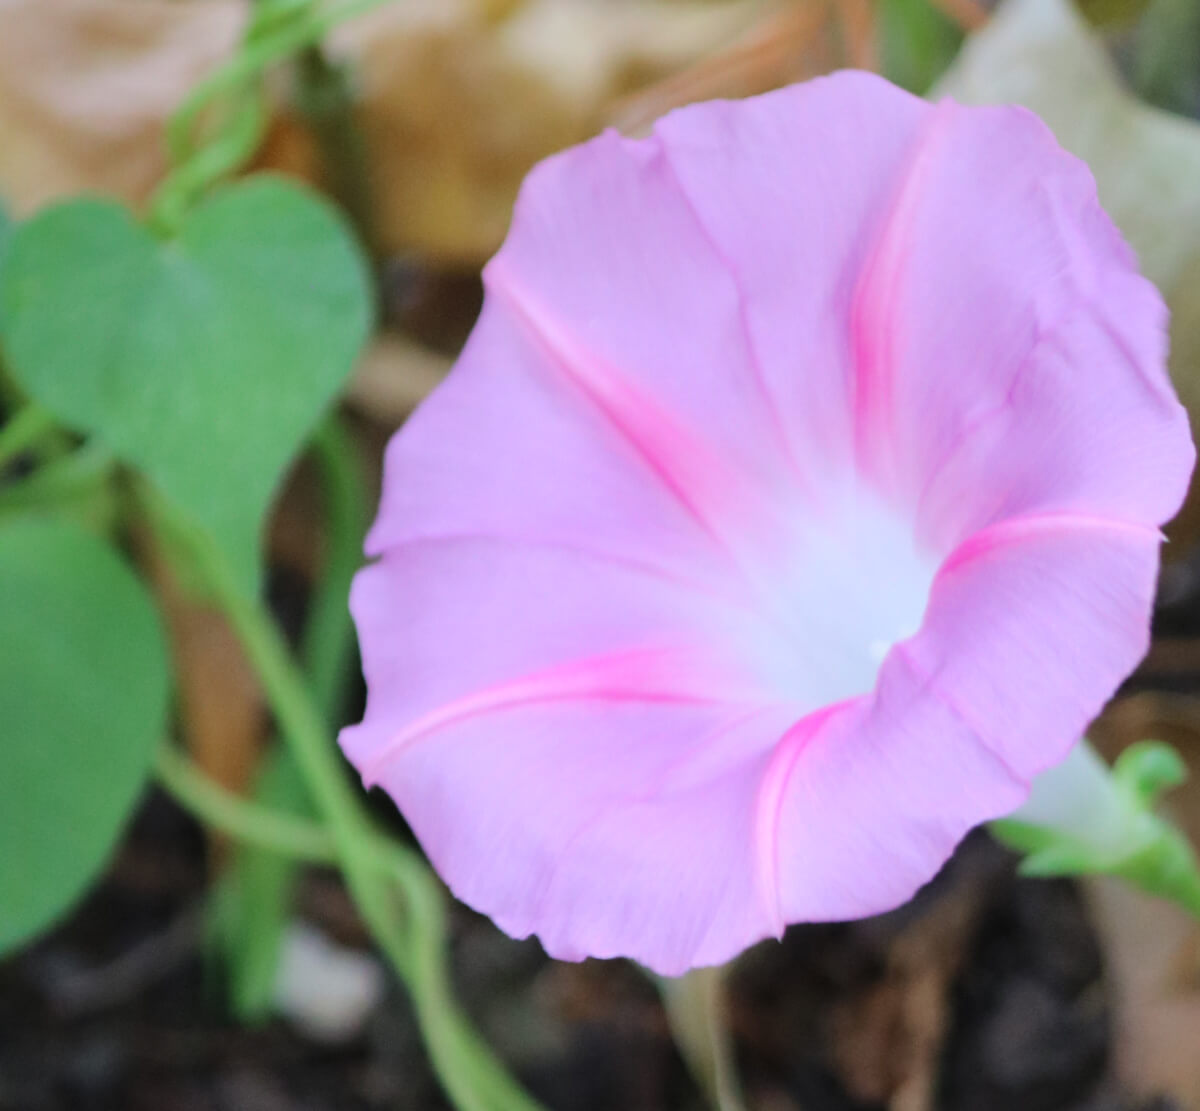 In Sunday Snippets 9/24/23, this is a pink petunia in my garden